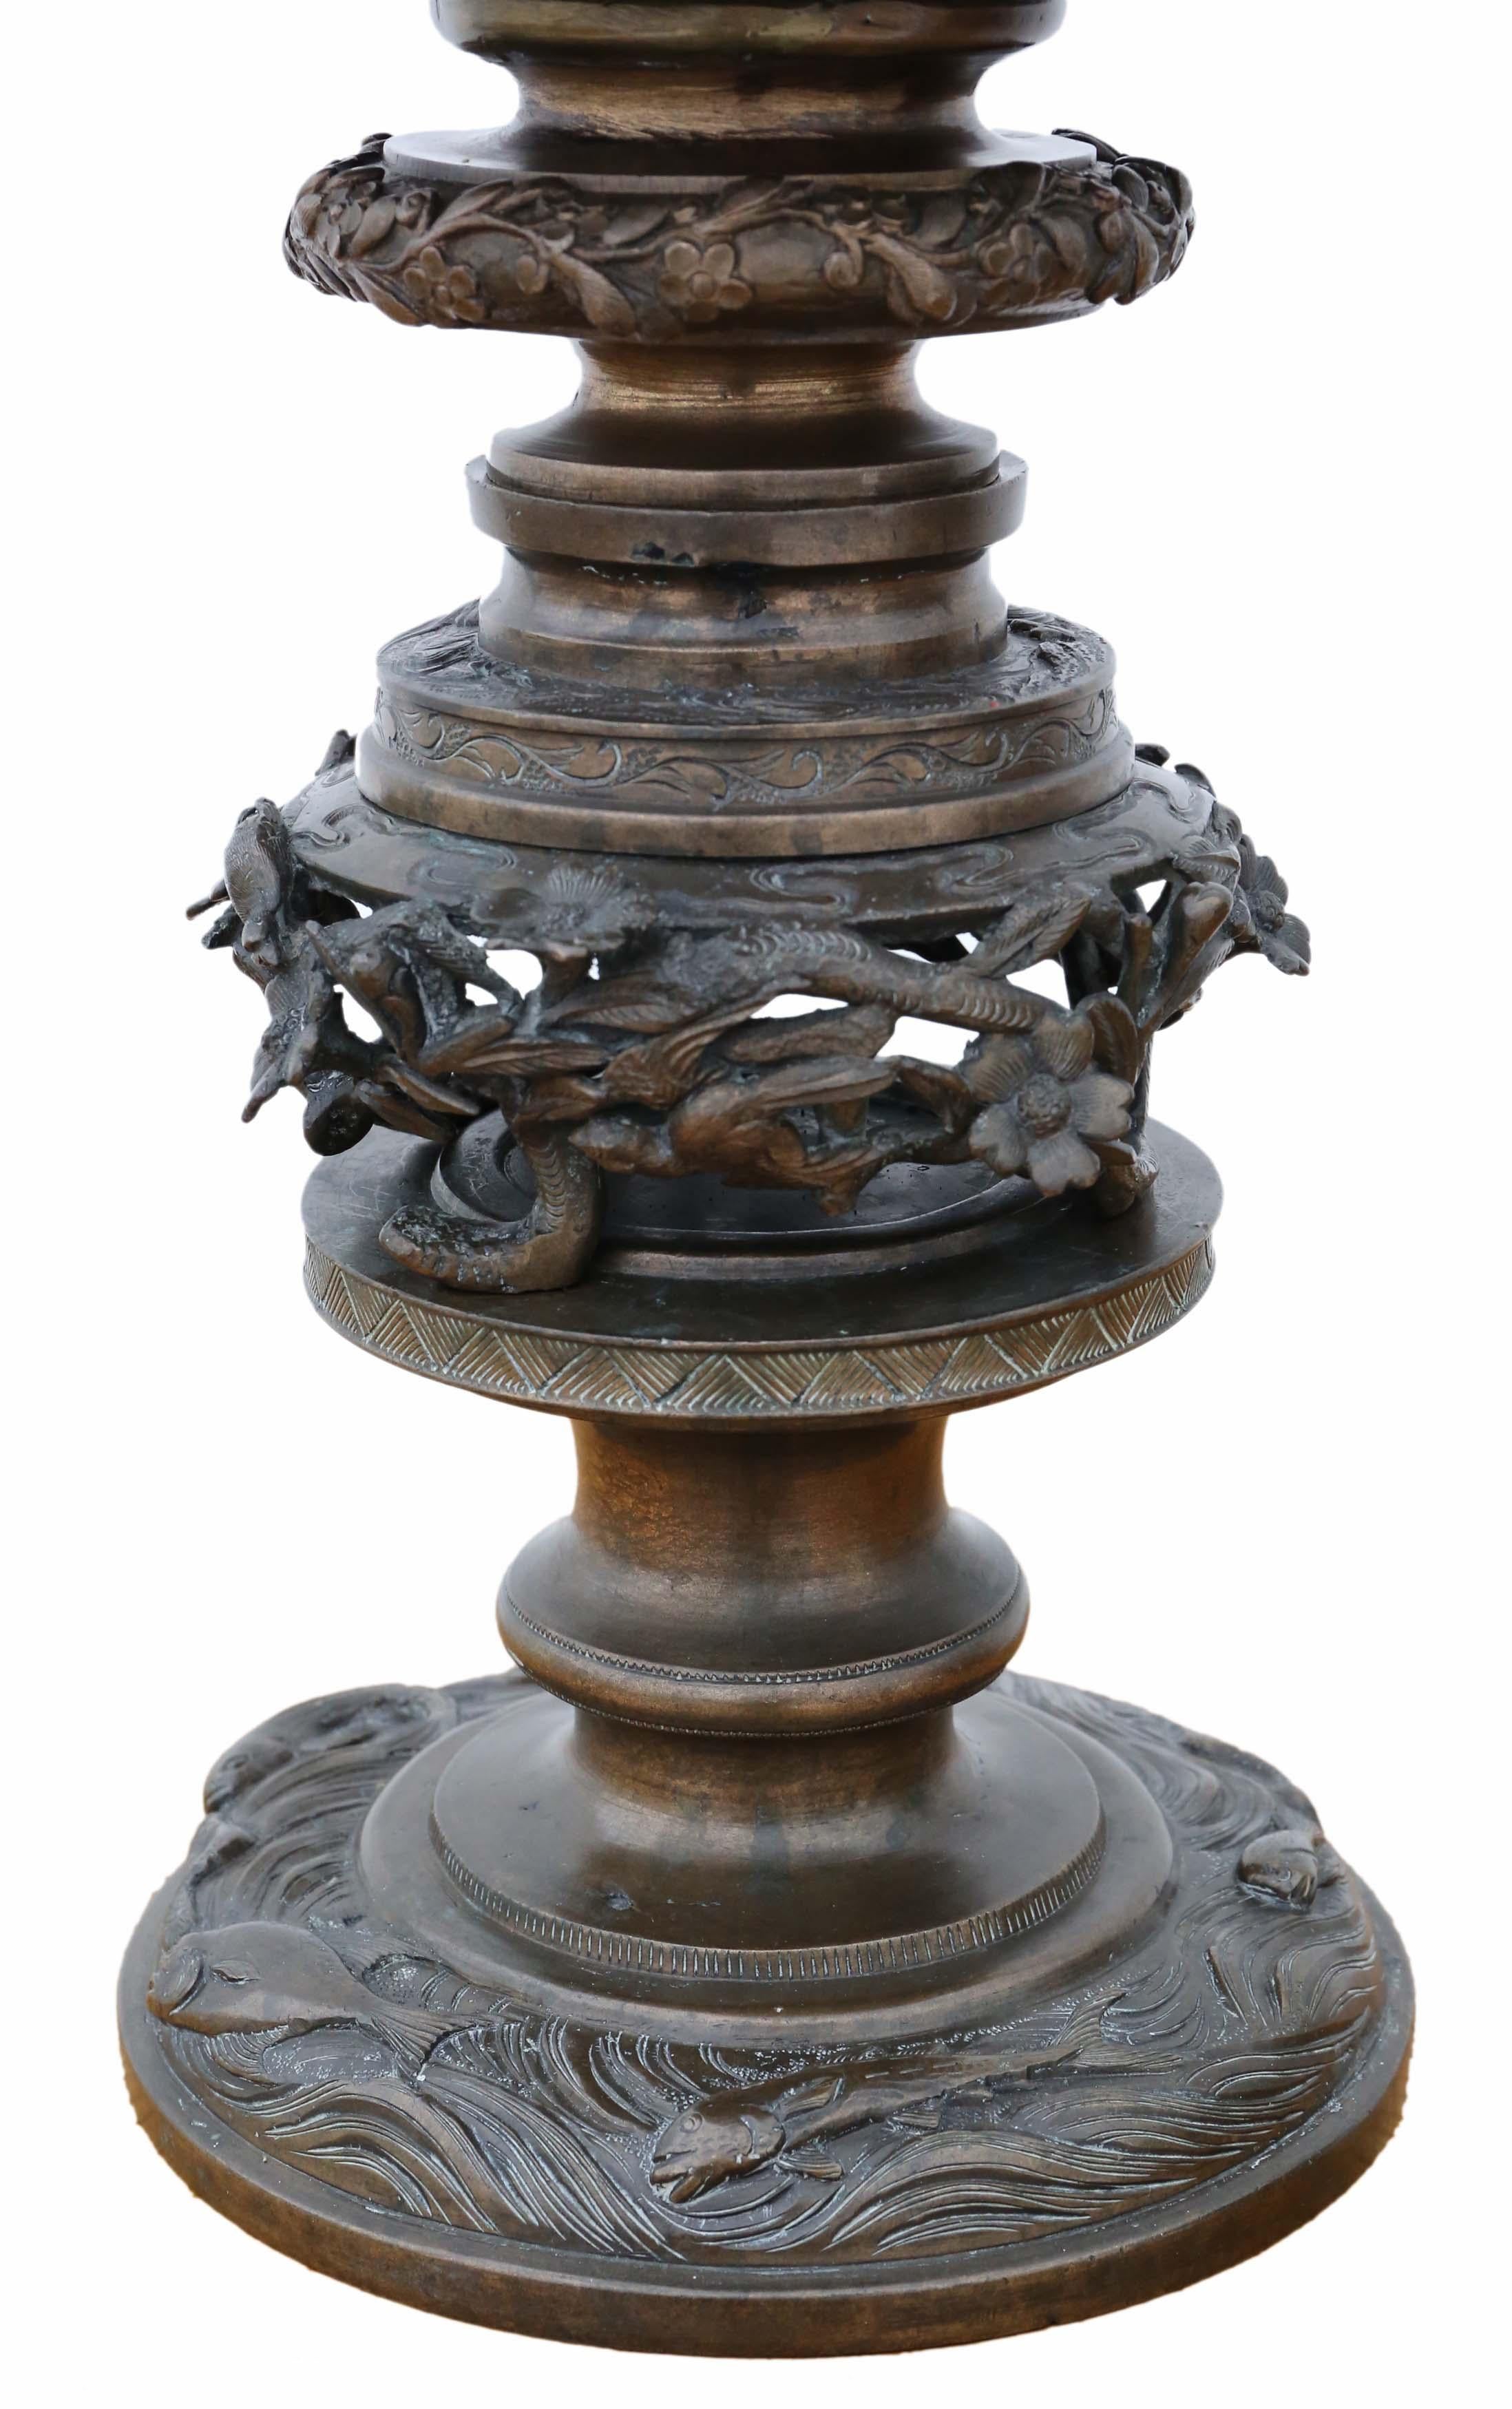 Antique quality Japanese tall decorative bronze vase display stand, Meiji period. This is a very rare item.

Would look amazing in the right location. Large and impressive centrepiece. Good color and patina.

Overall maximum dimensions: 28cm